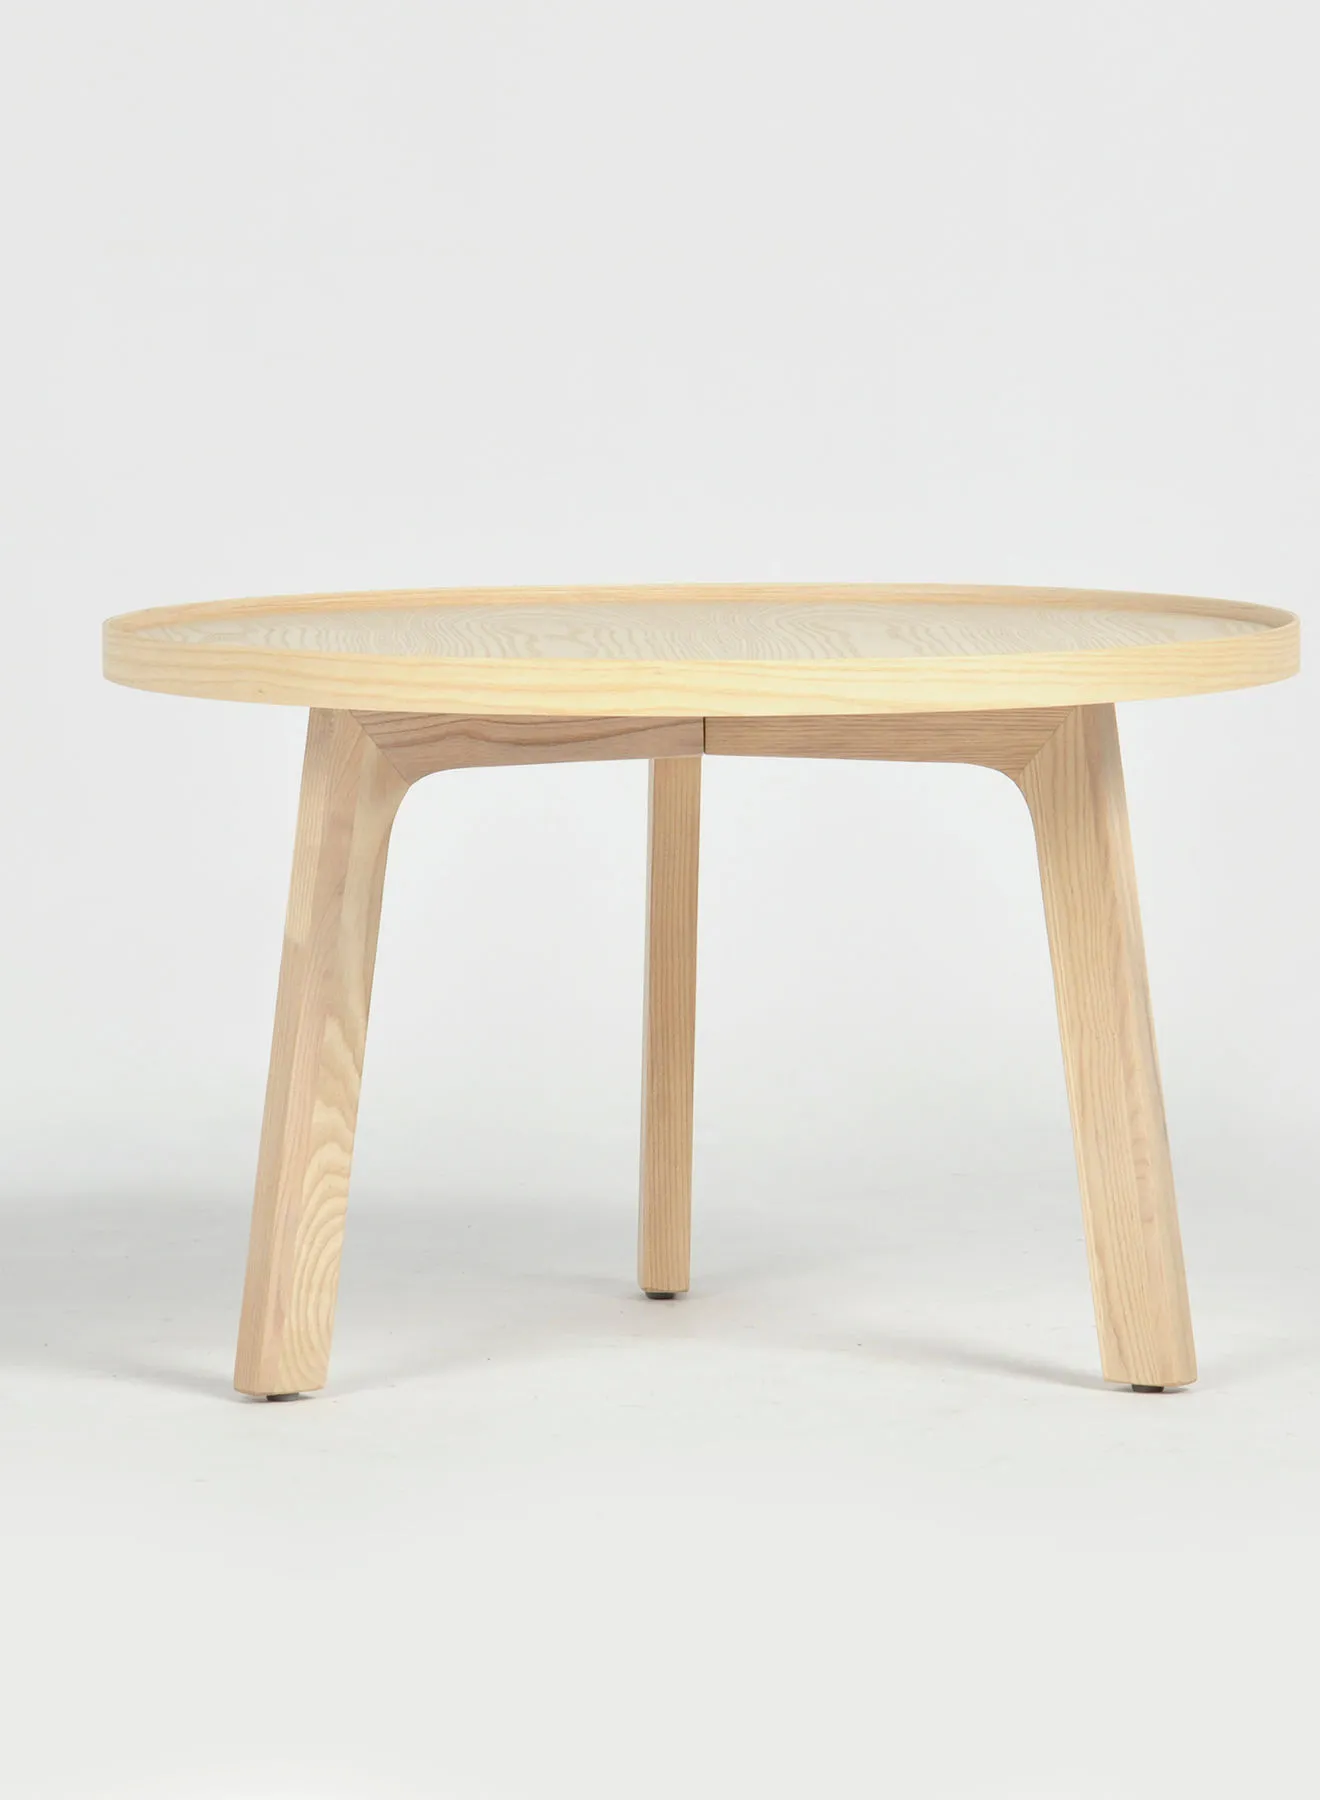 Switch Coffee Table Used As Coffee Corner And Side Table In Natural Wood - Size 65 X 65 X 40